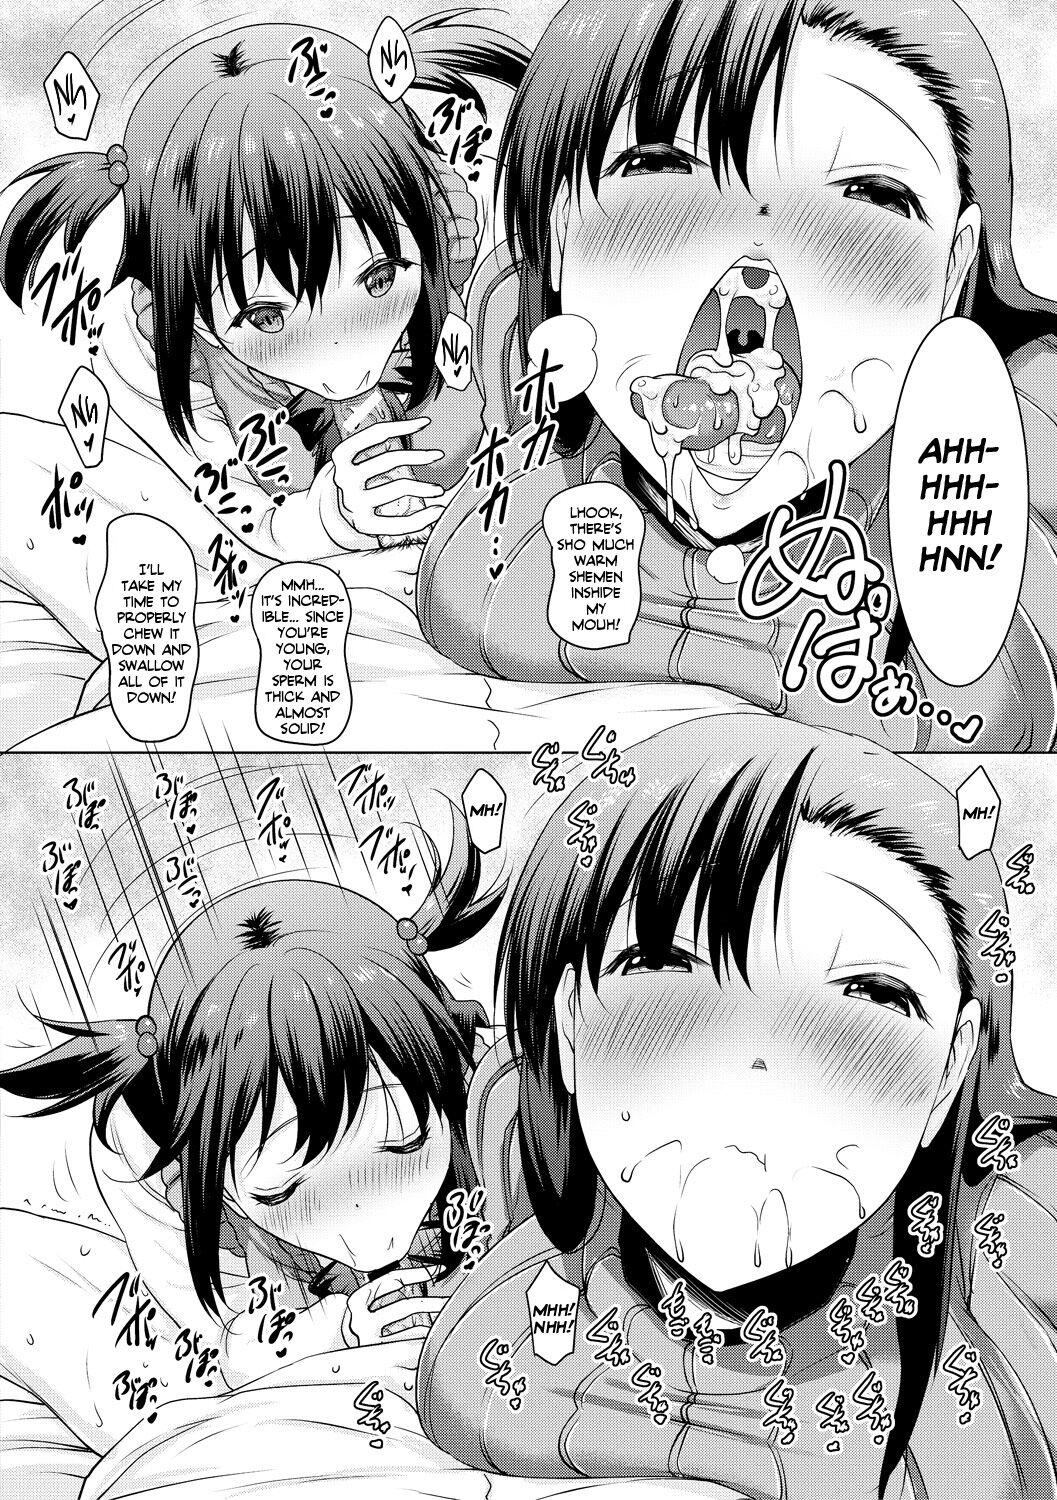 [Pony-R] I Can't Live Without My Little Sister's Tongue Chapter 01-02 + Secret Baby-making Sex with a Big-titted Mother and Daughter! (Kyonyuu Oyako no Shita to Shikyuu ni Renzoku Shasei) [English] [Team Rabu2] [Digital] 52